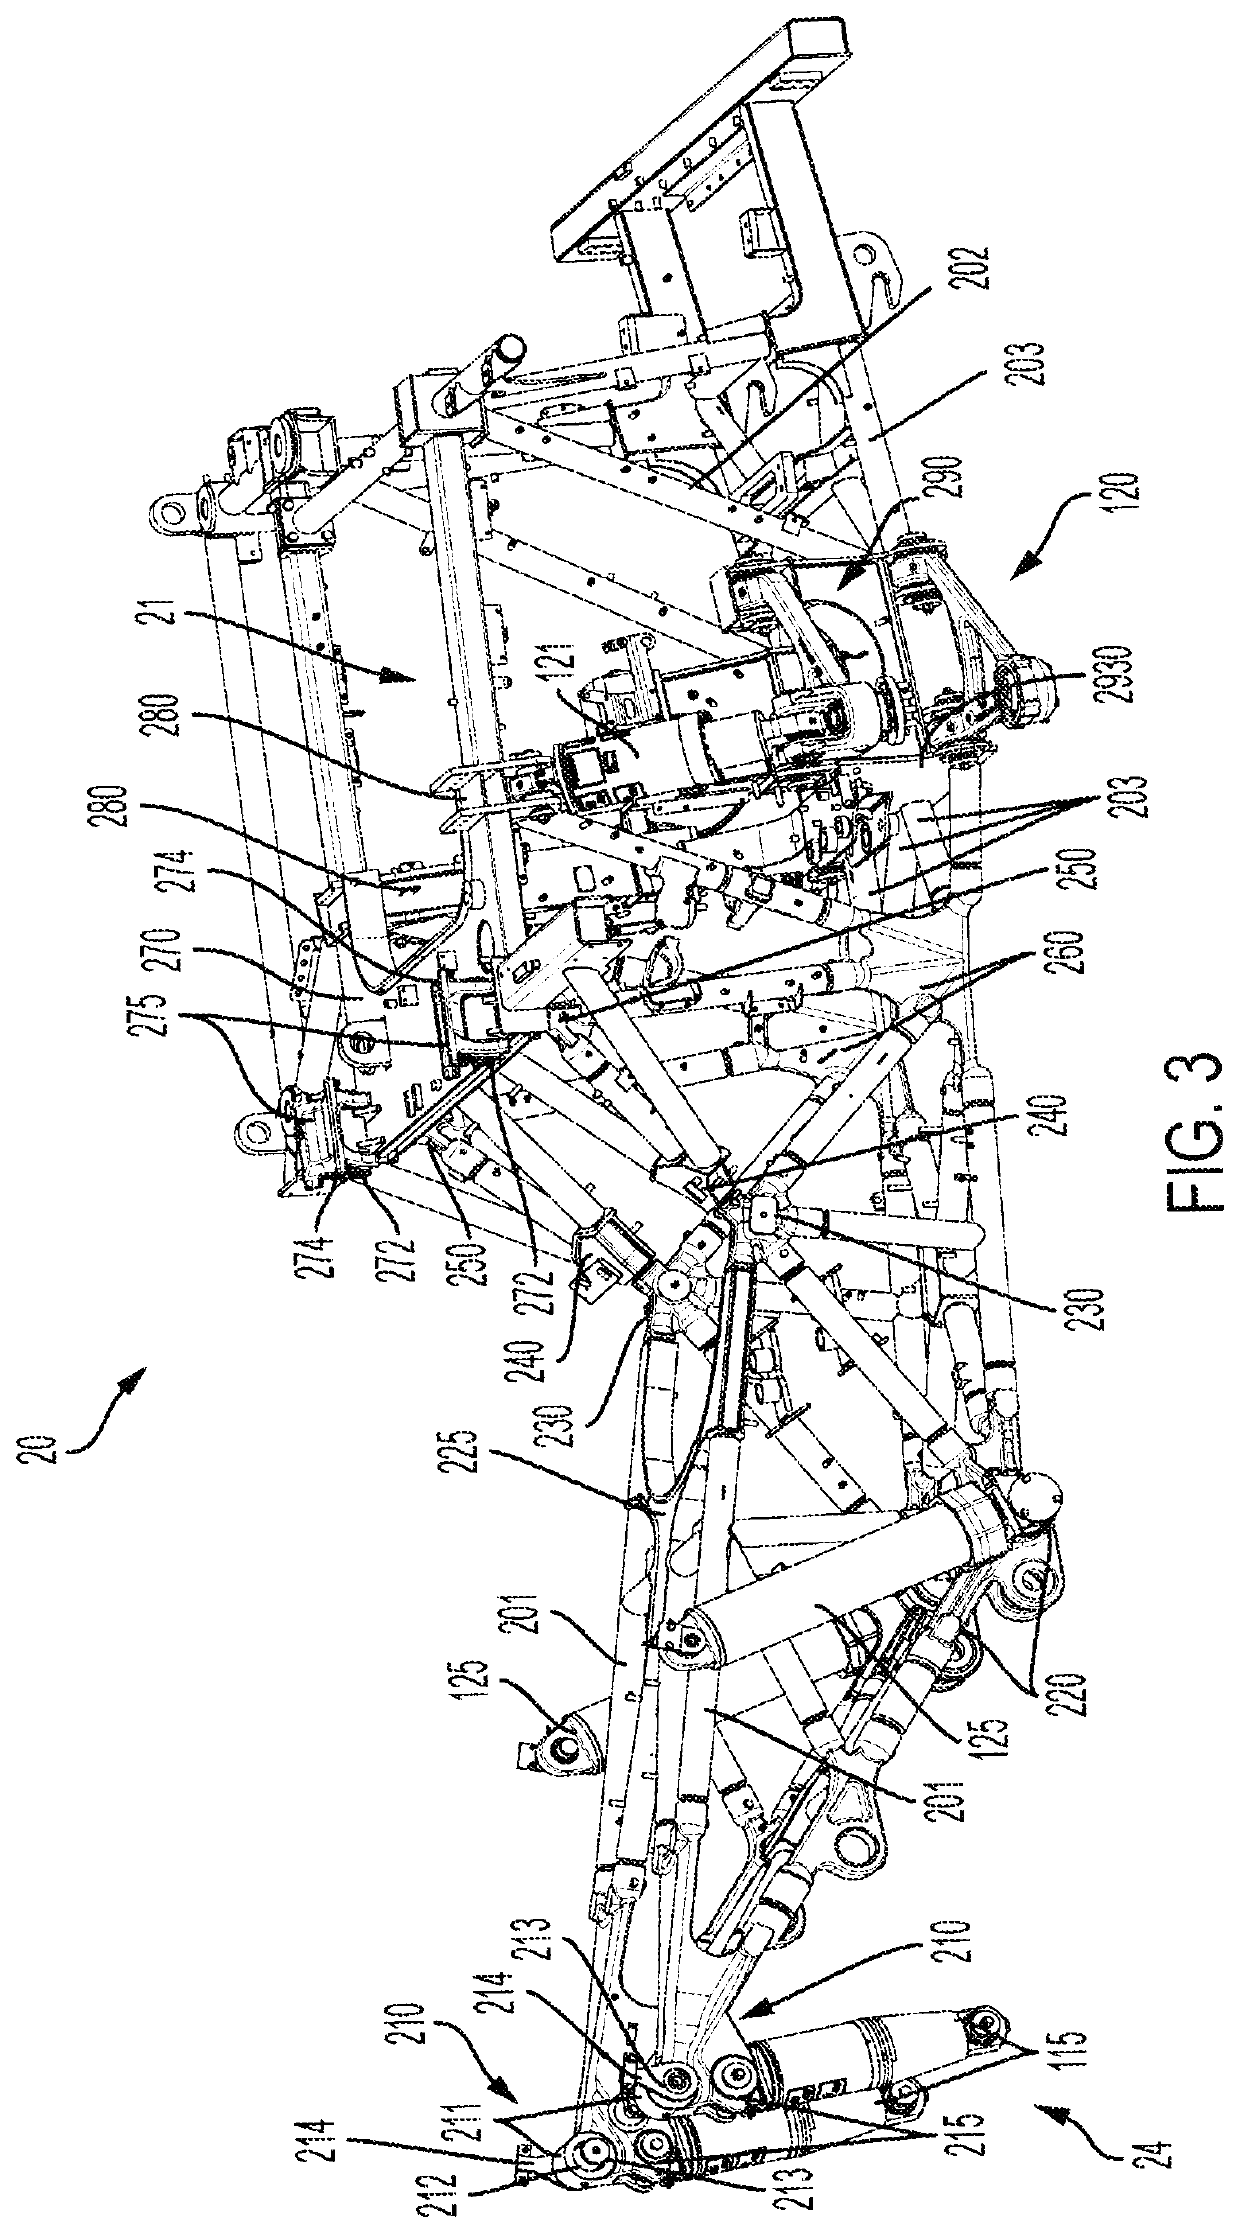 Space frame front lower suspension connection